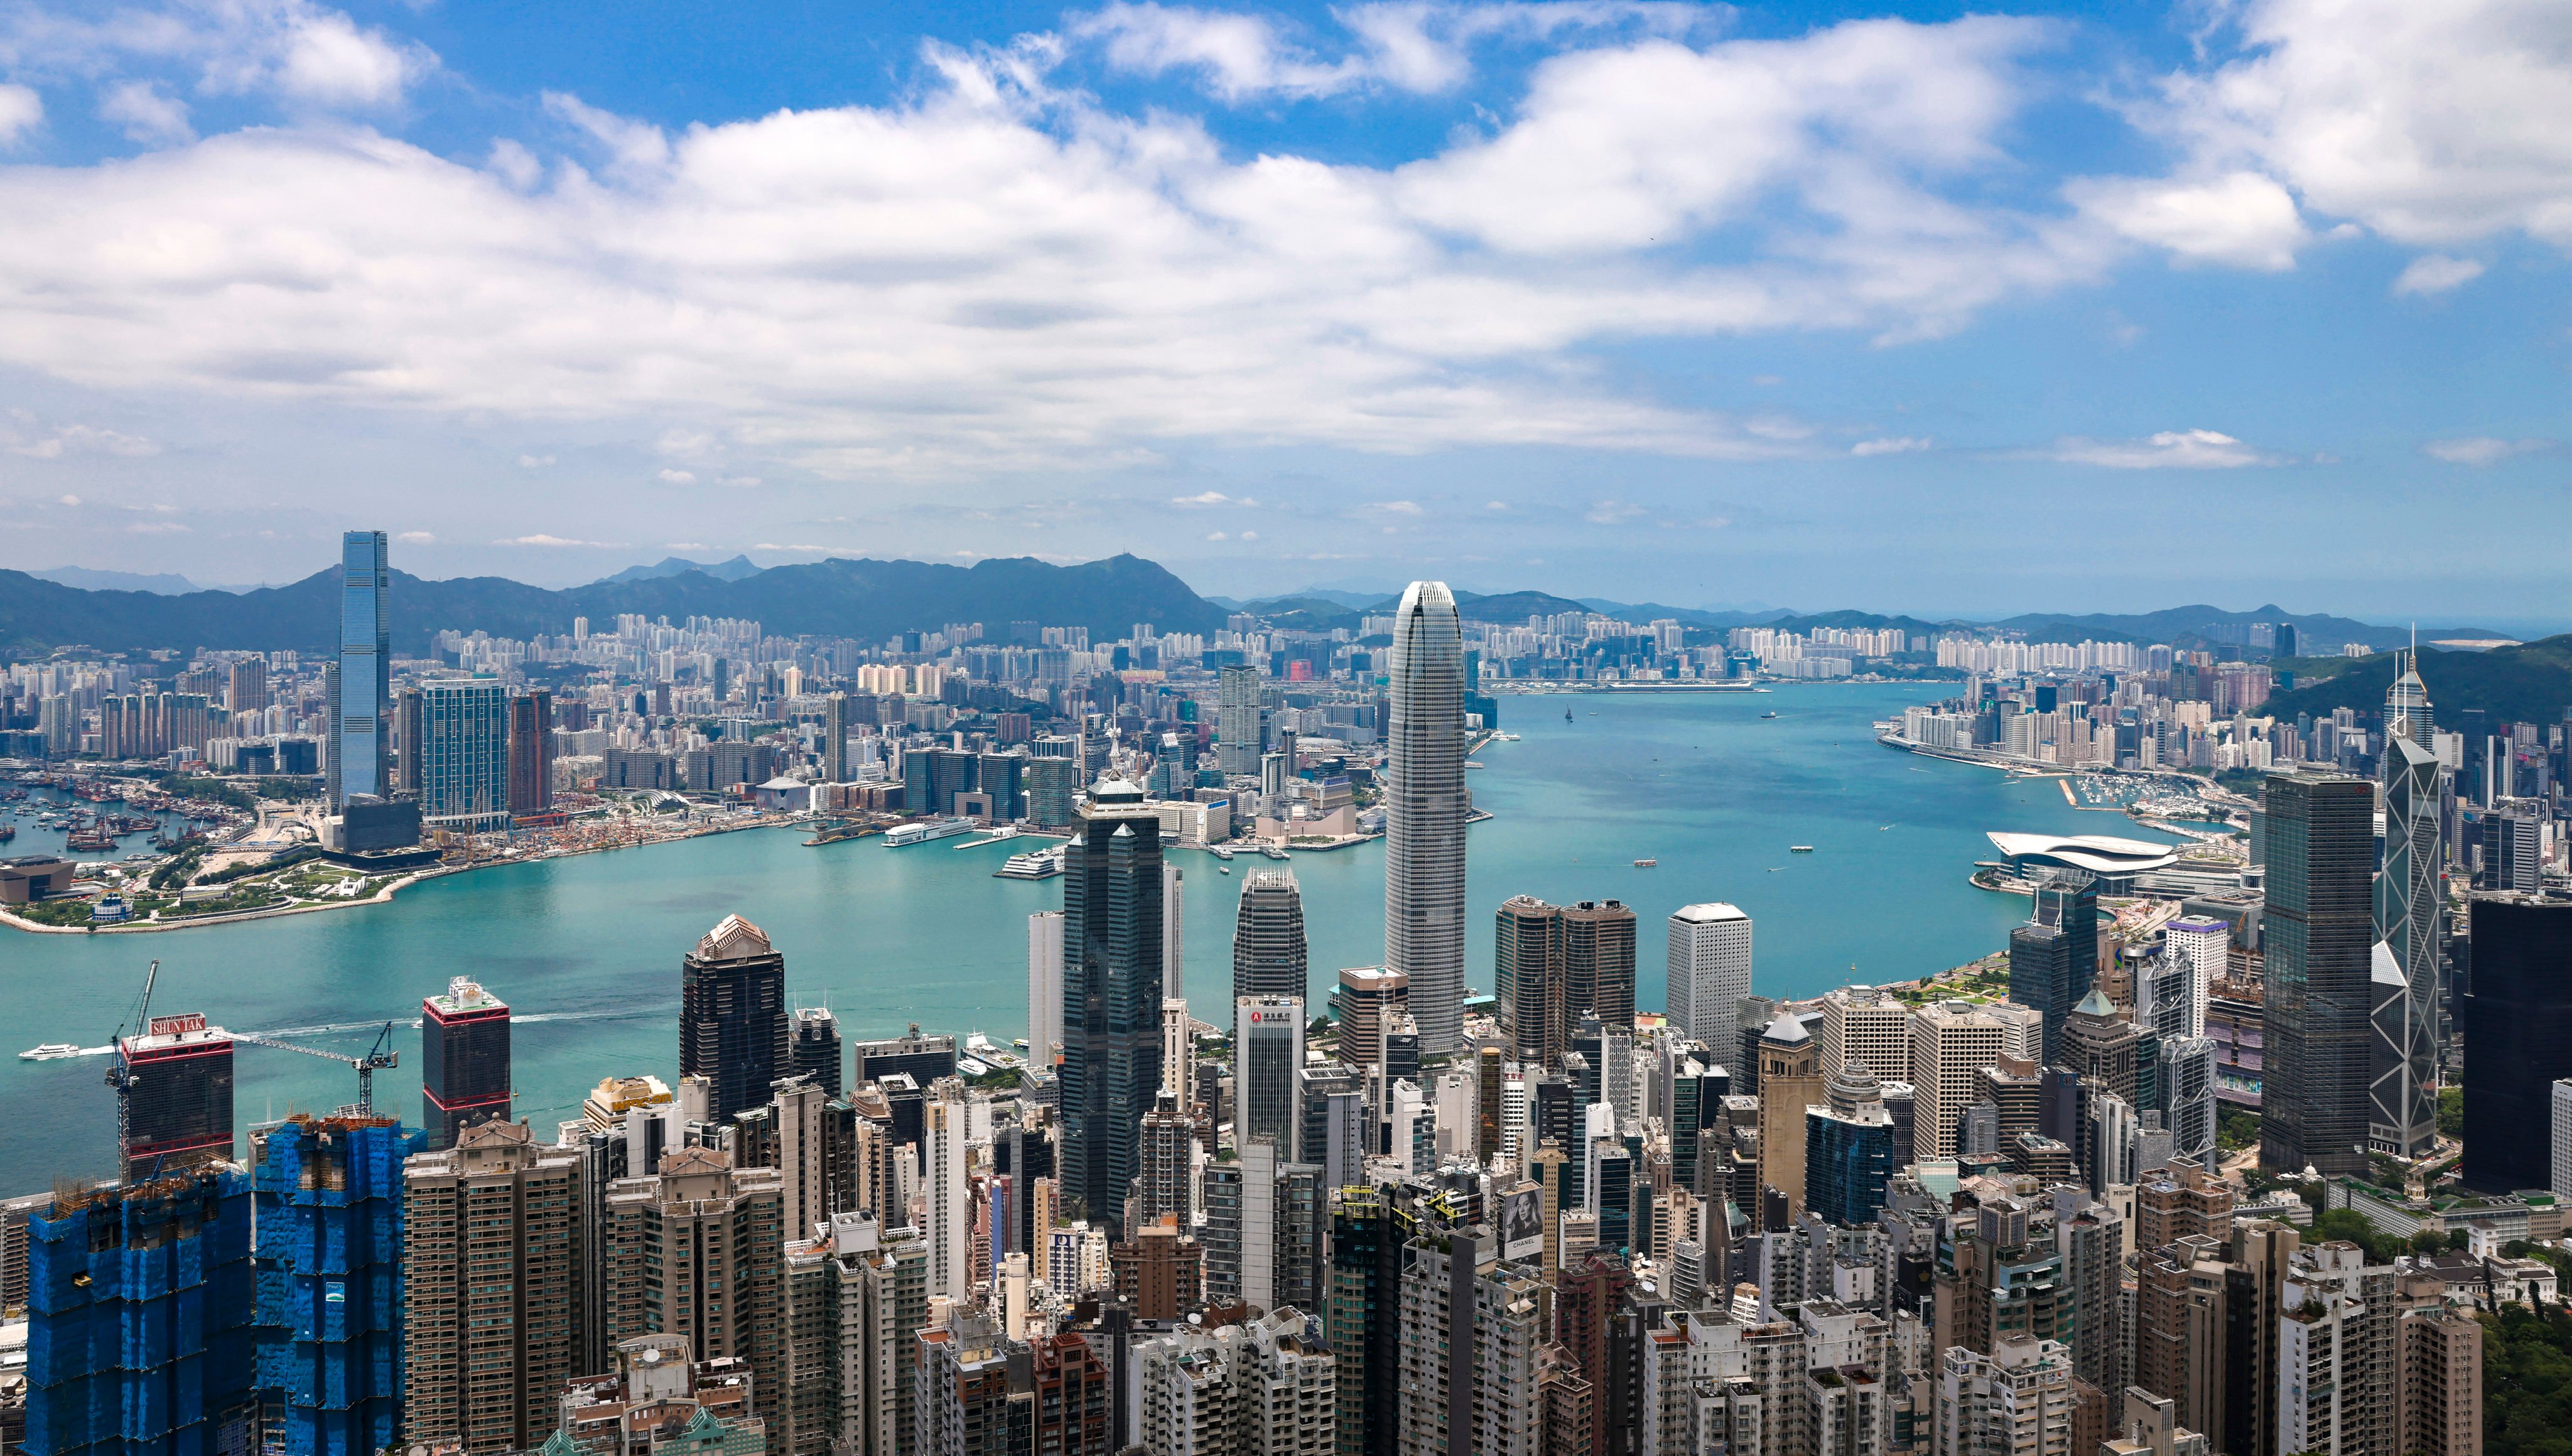 Hong Kong’s financial secretary says he is not optimistic over prospects for Hong Kong’s economic growth in the near-term. Photo: K. Y. Cheng